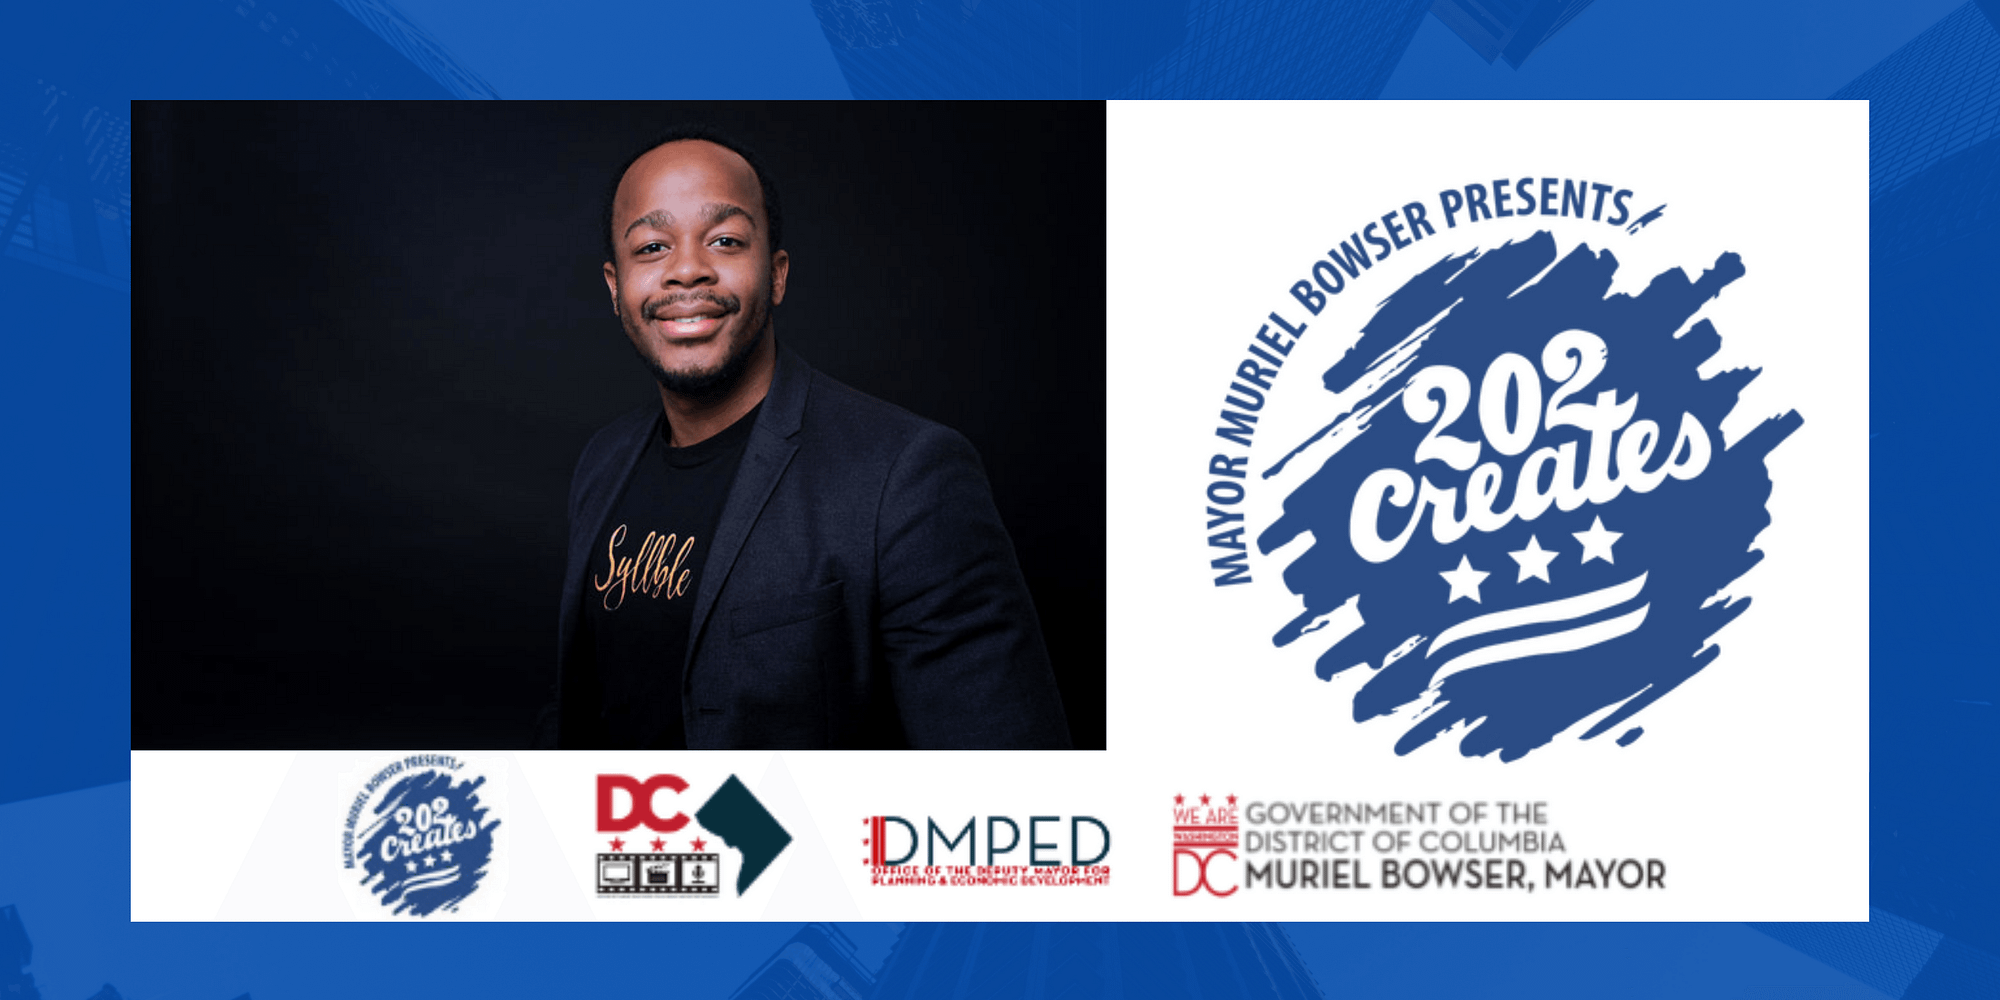 Syllble Selected to Participate in Washington D.C. Mayor Muriel Bowser’s 202Creates Residency Program